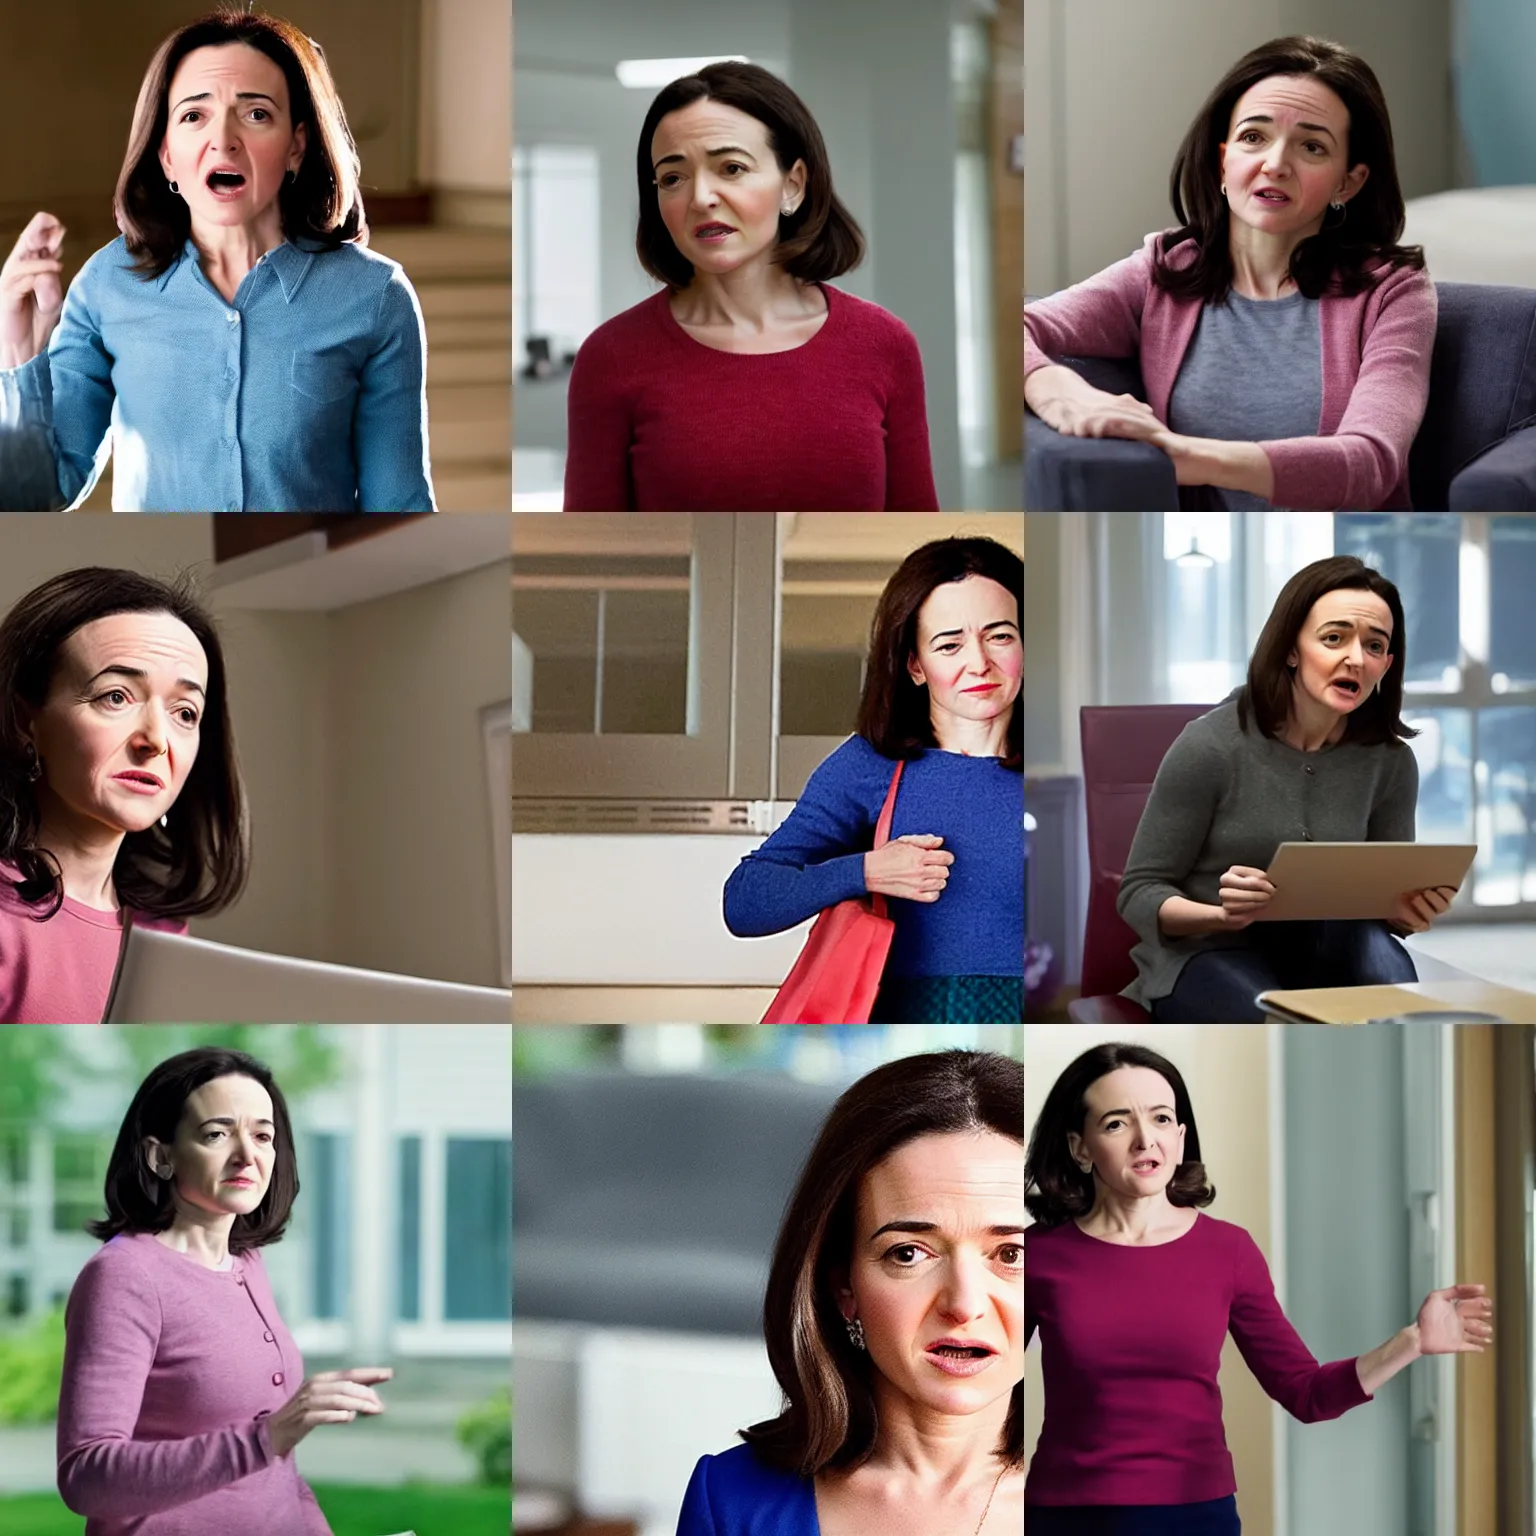 Prompt: Movie still of Sheryl Sandberg depicted as an angry woman in Facebook The Movie (2017), directed by Steven Spielberg